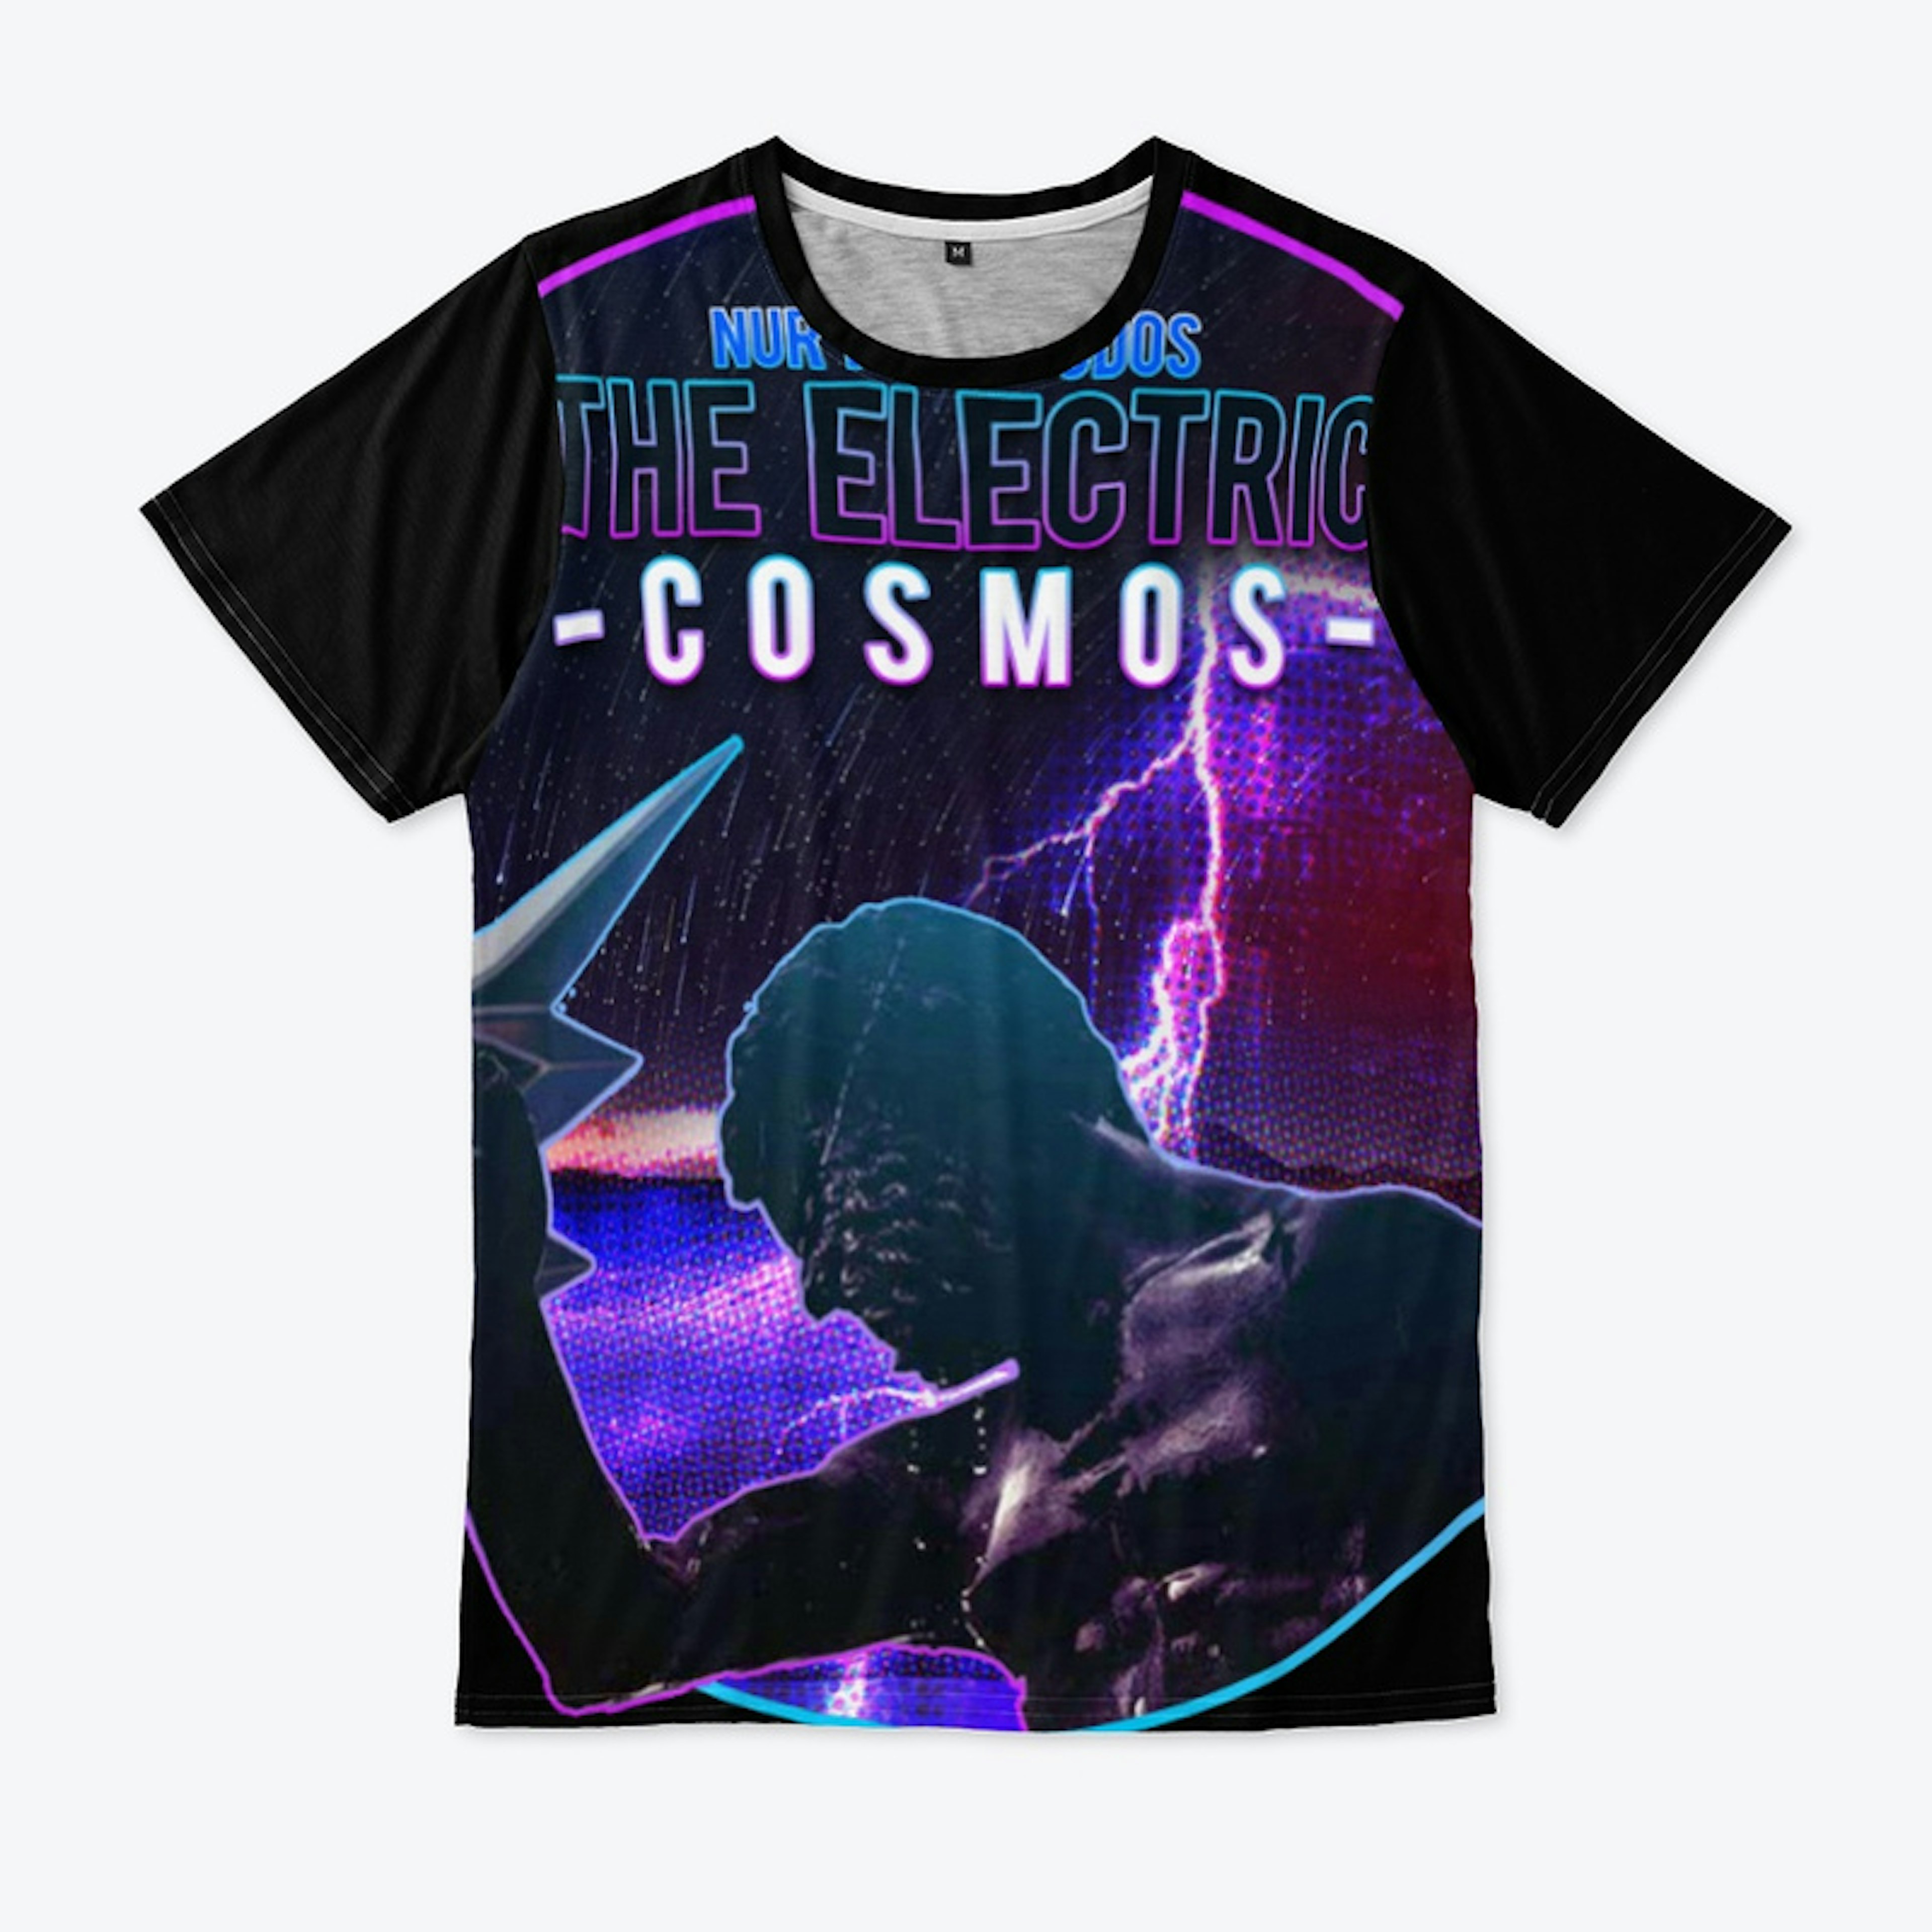 The Electric Cosmos